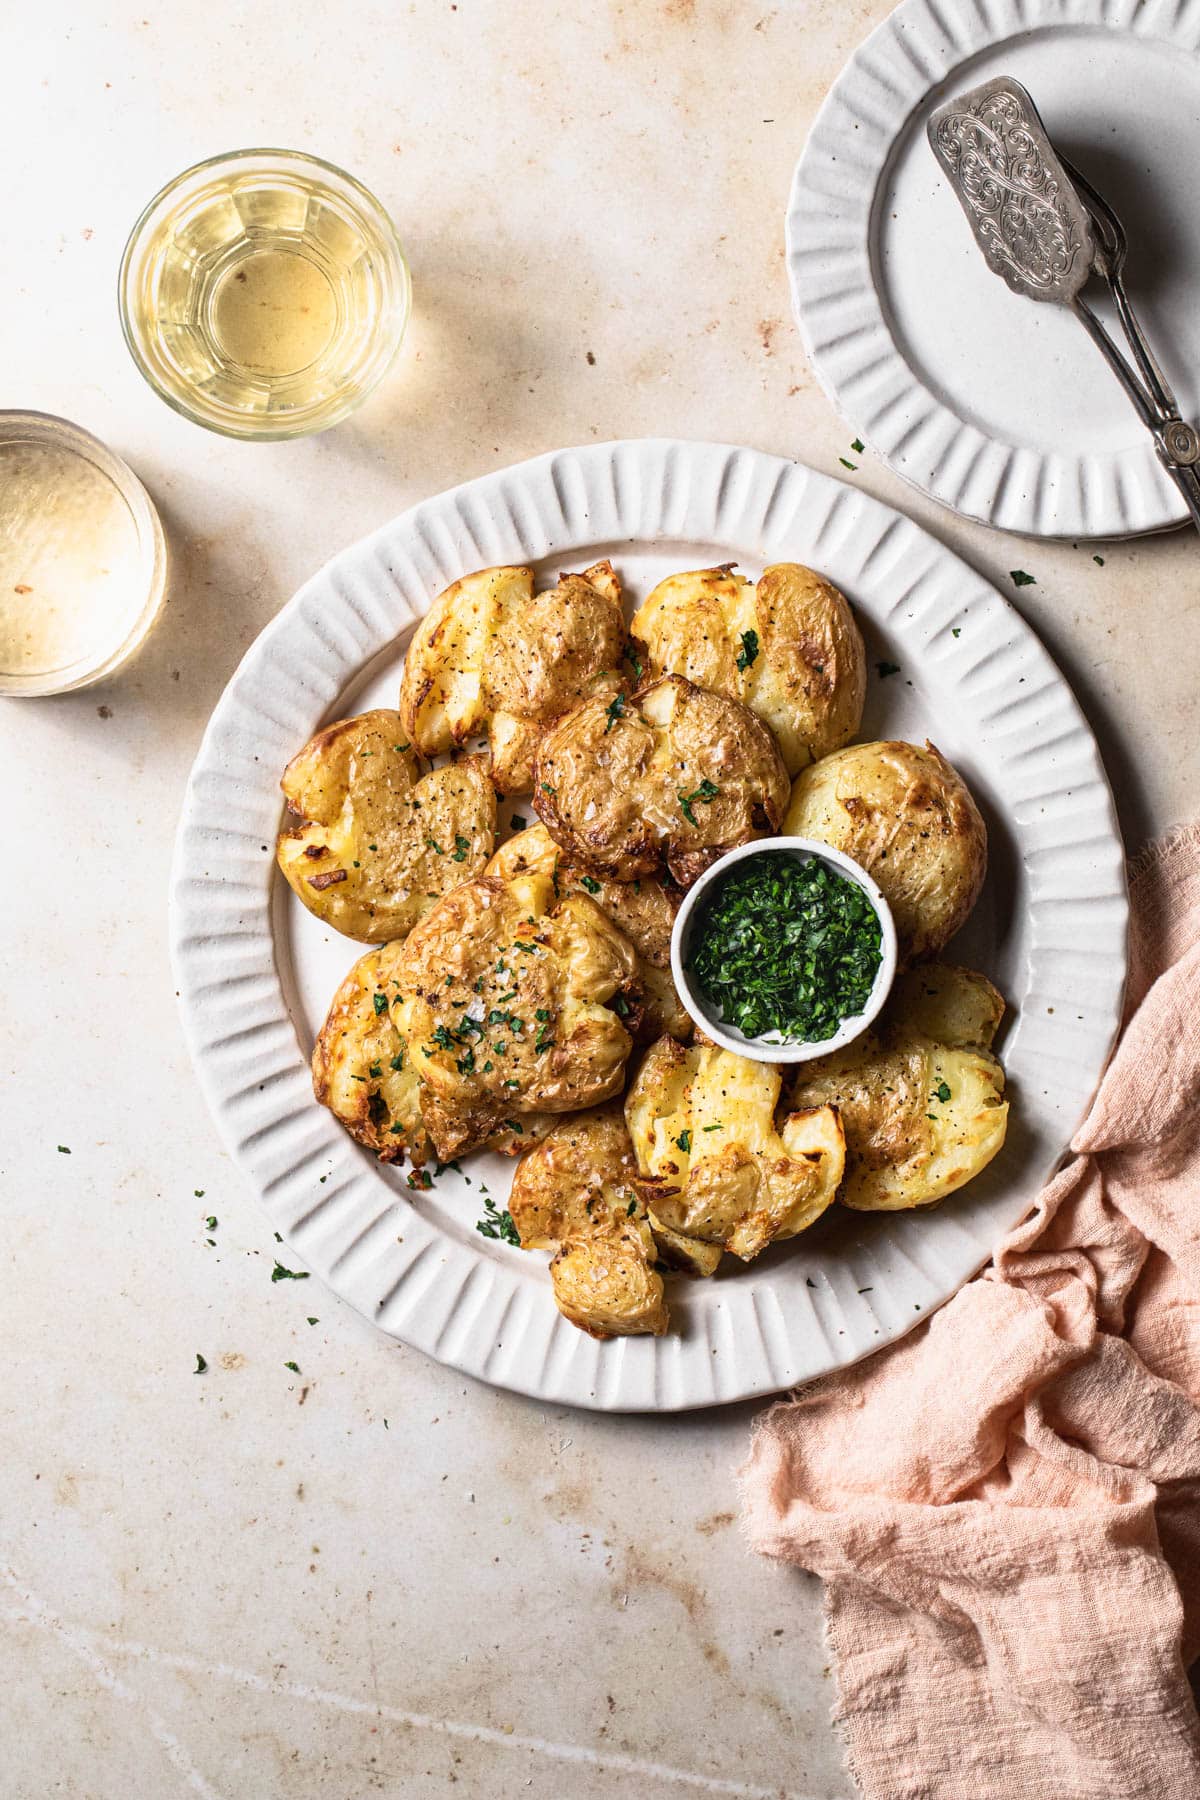 air fryer smashed potatoes on decorative white plate, with small bowl of chopped herbs and two glasses of white wine.